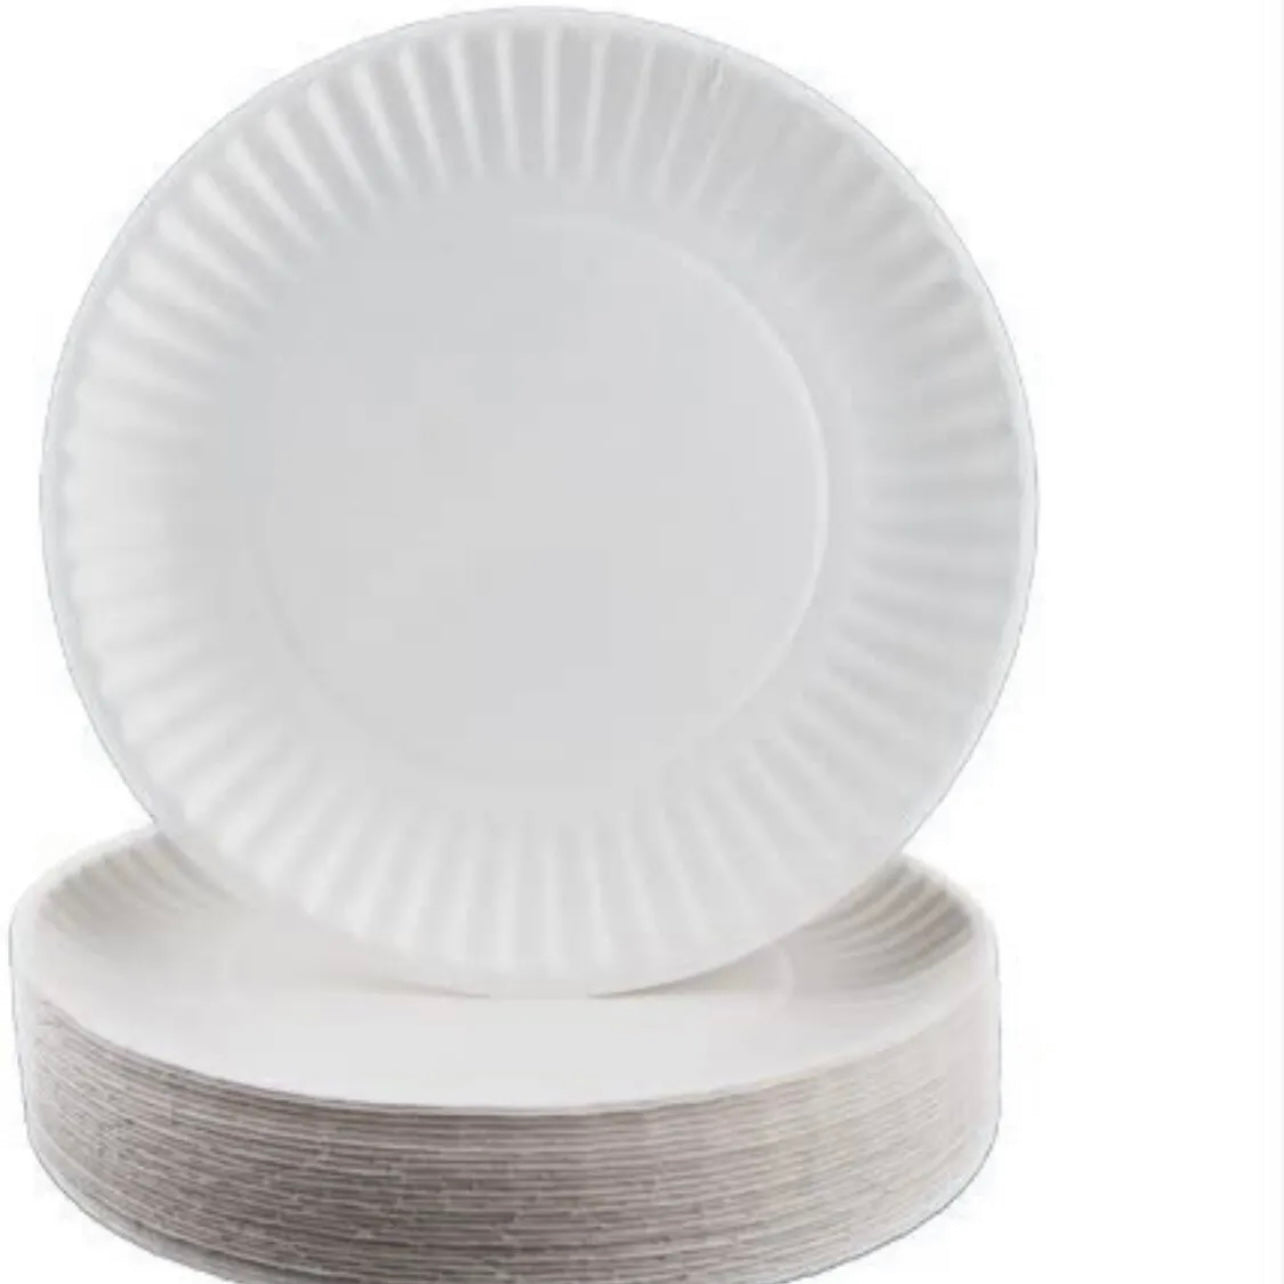 Paper Plates Disposable 100 White Card Board Party Plates Buffet 6 7 9